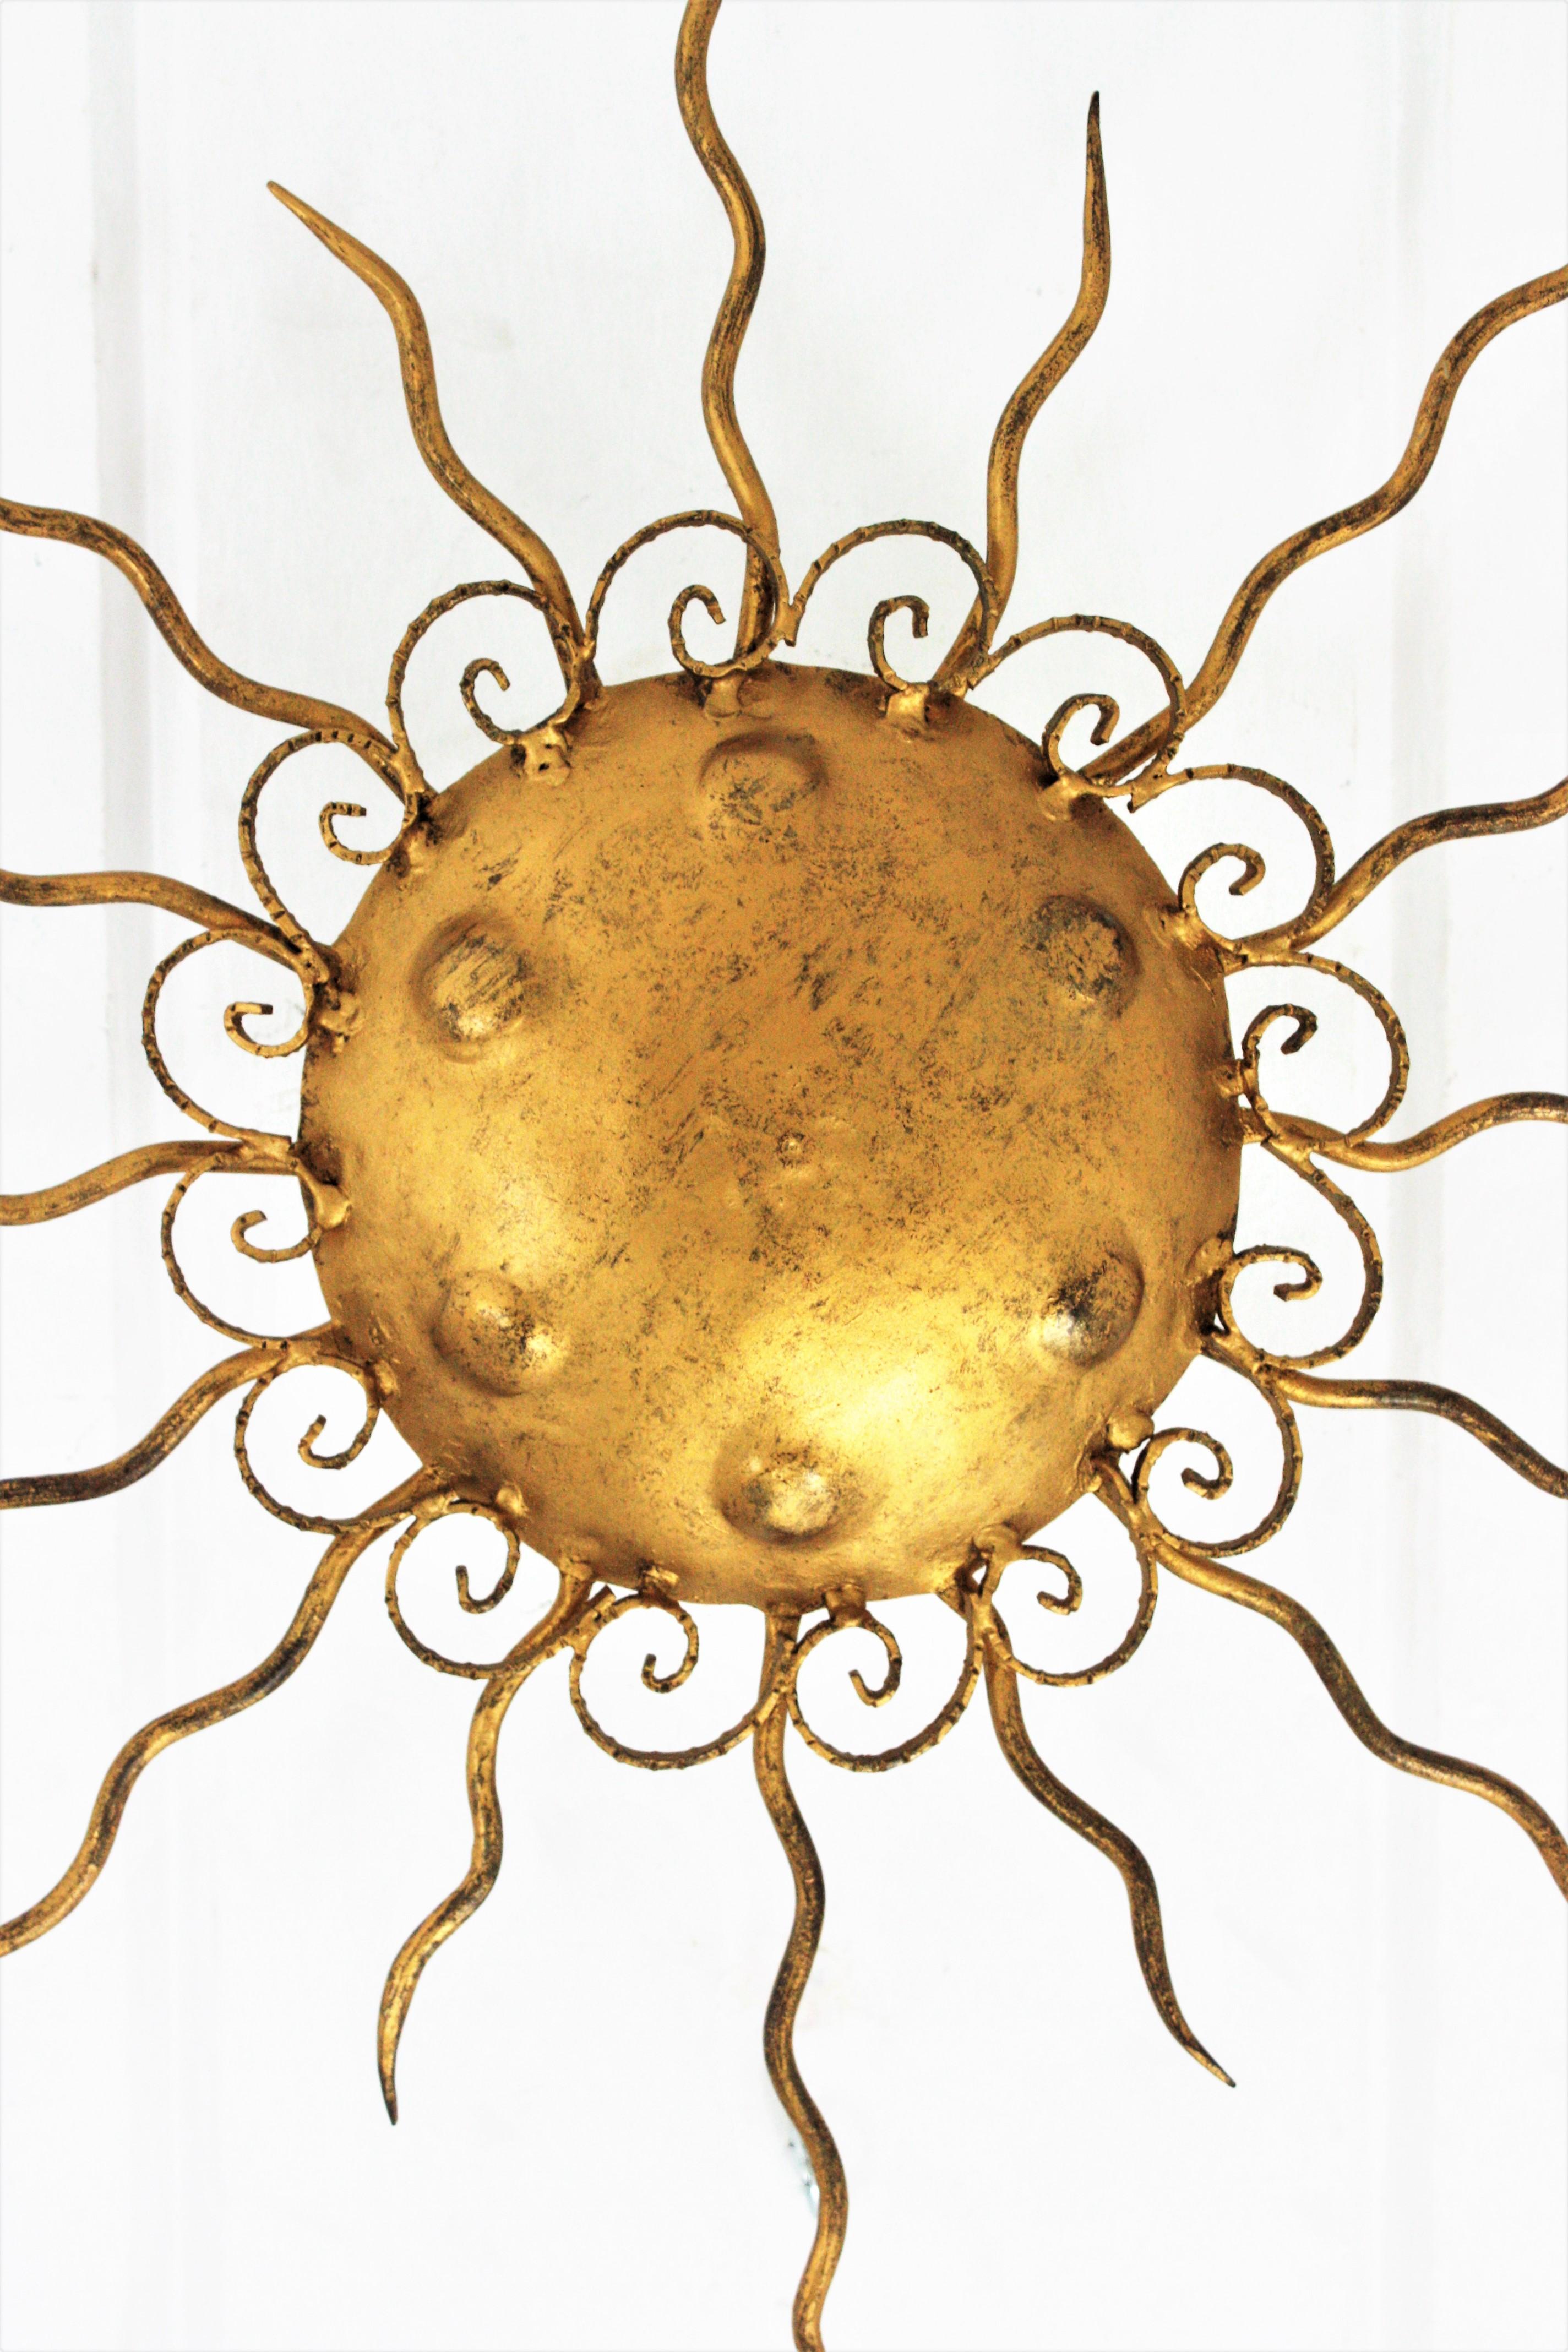 Gold leaf gilt iron sunburst flush mount or wall sconce from the Brutalist period. Spain, 1950s.
Richly decorated with scrolls surrounding the central shade and engraved circles. 
Beautiful to place as ceiling light fixture but also as wall